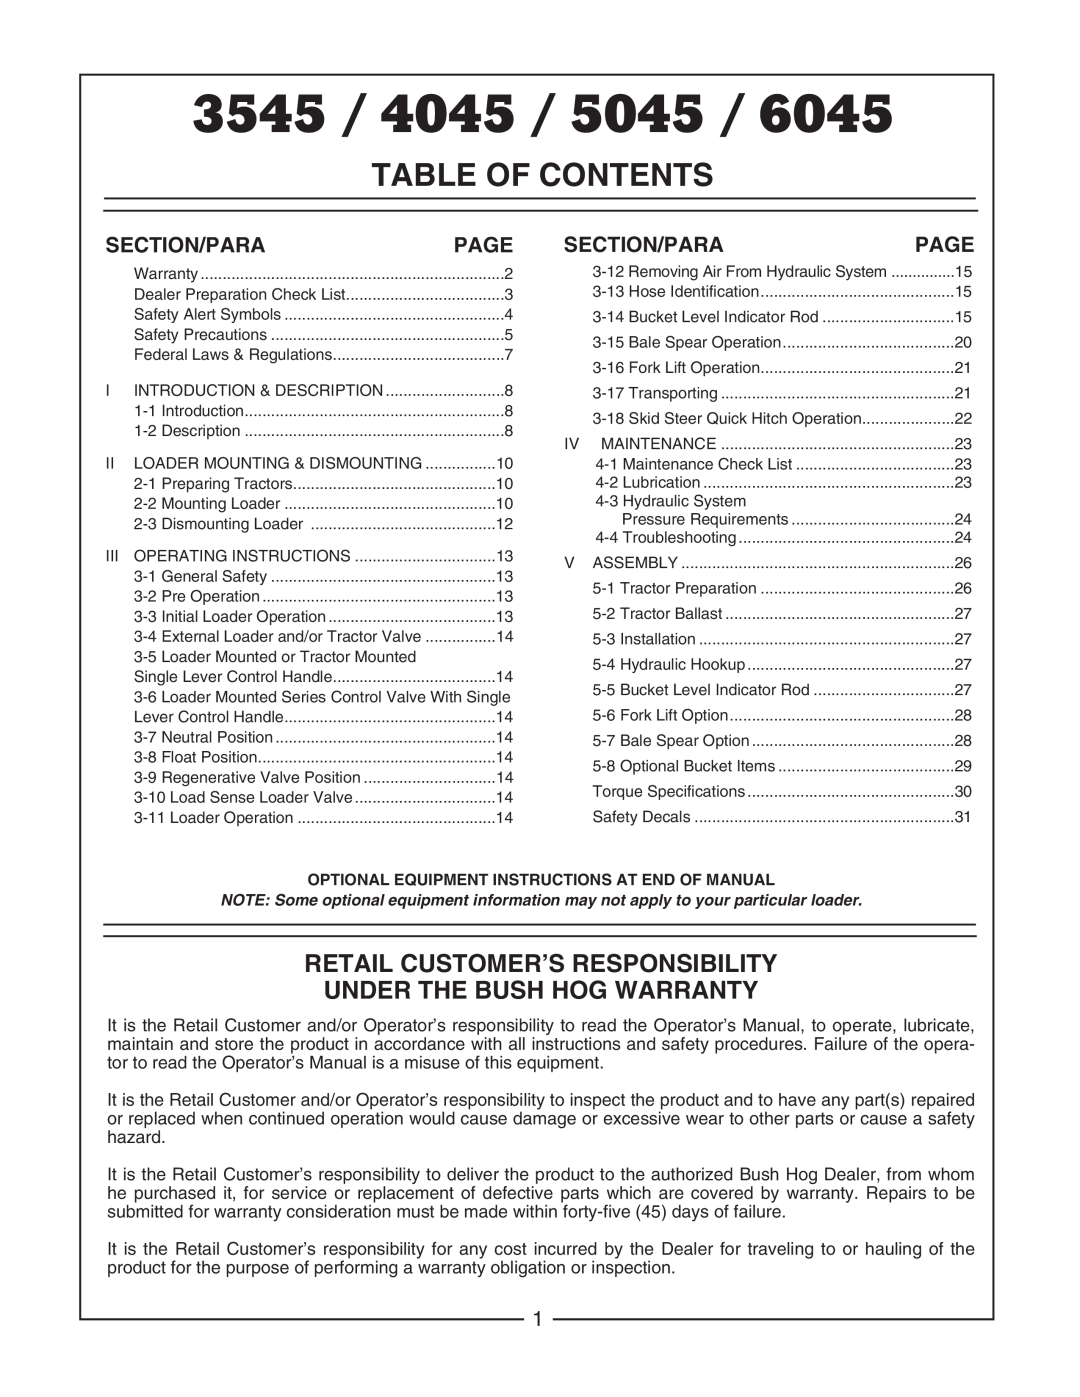 Bush Hog 5045 3545, Table Of Contents, Retail Customer’S Responsibility Under The Bush Hog Warranty, Section/Para, Page 